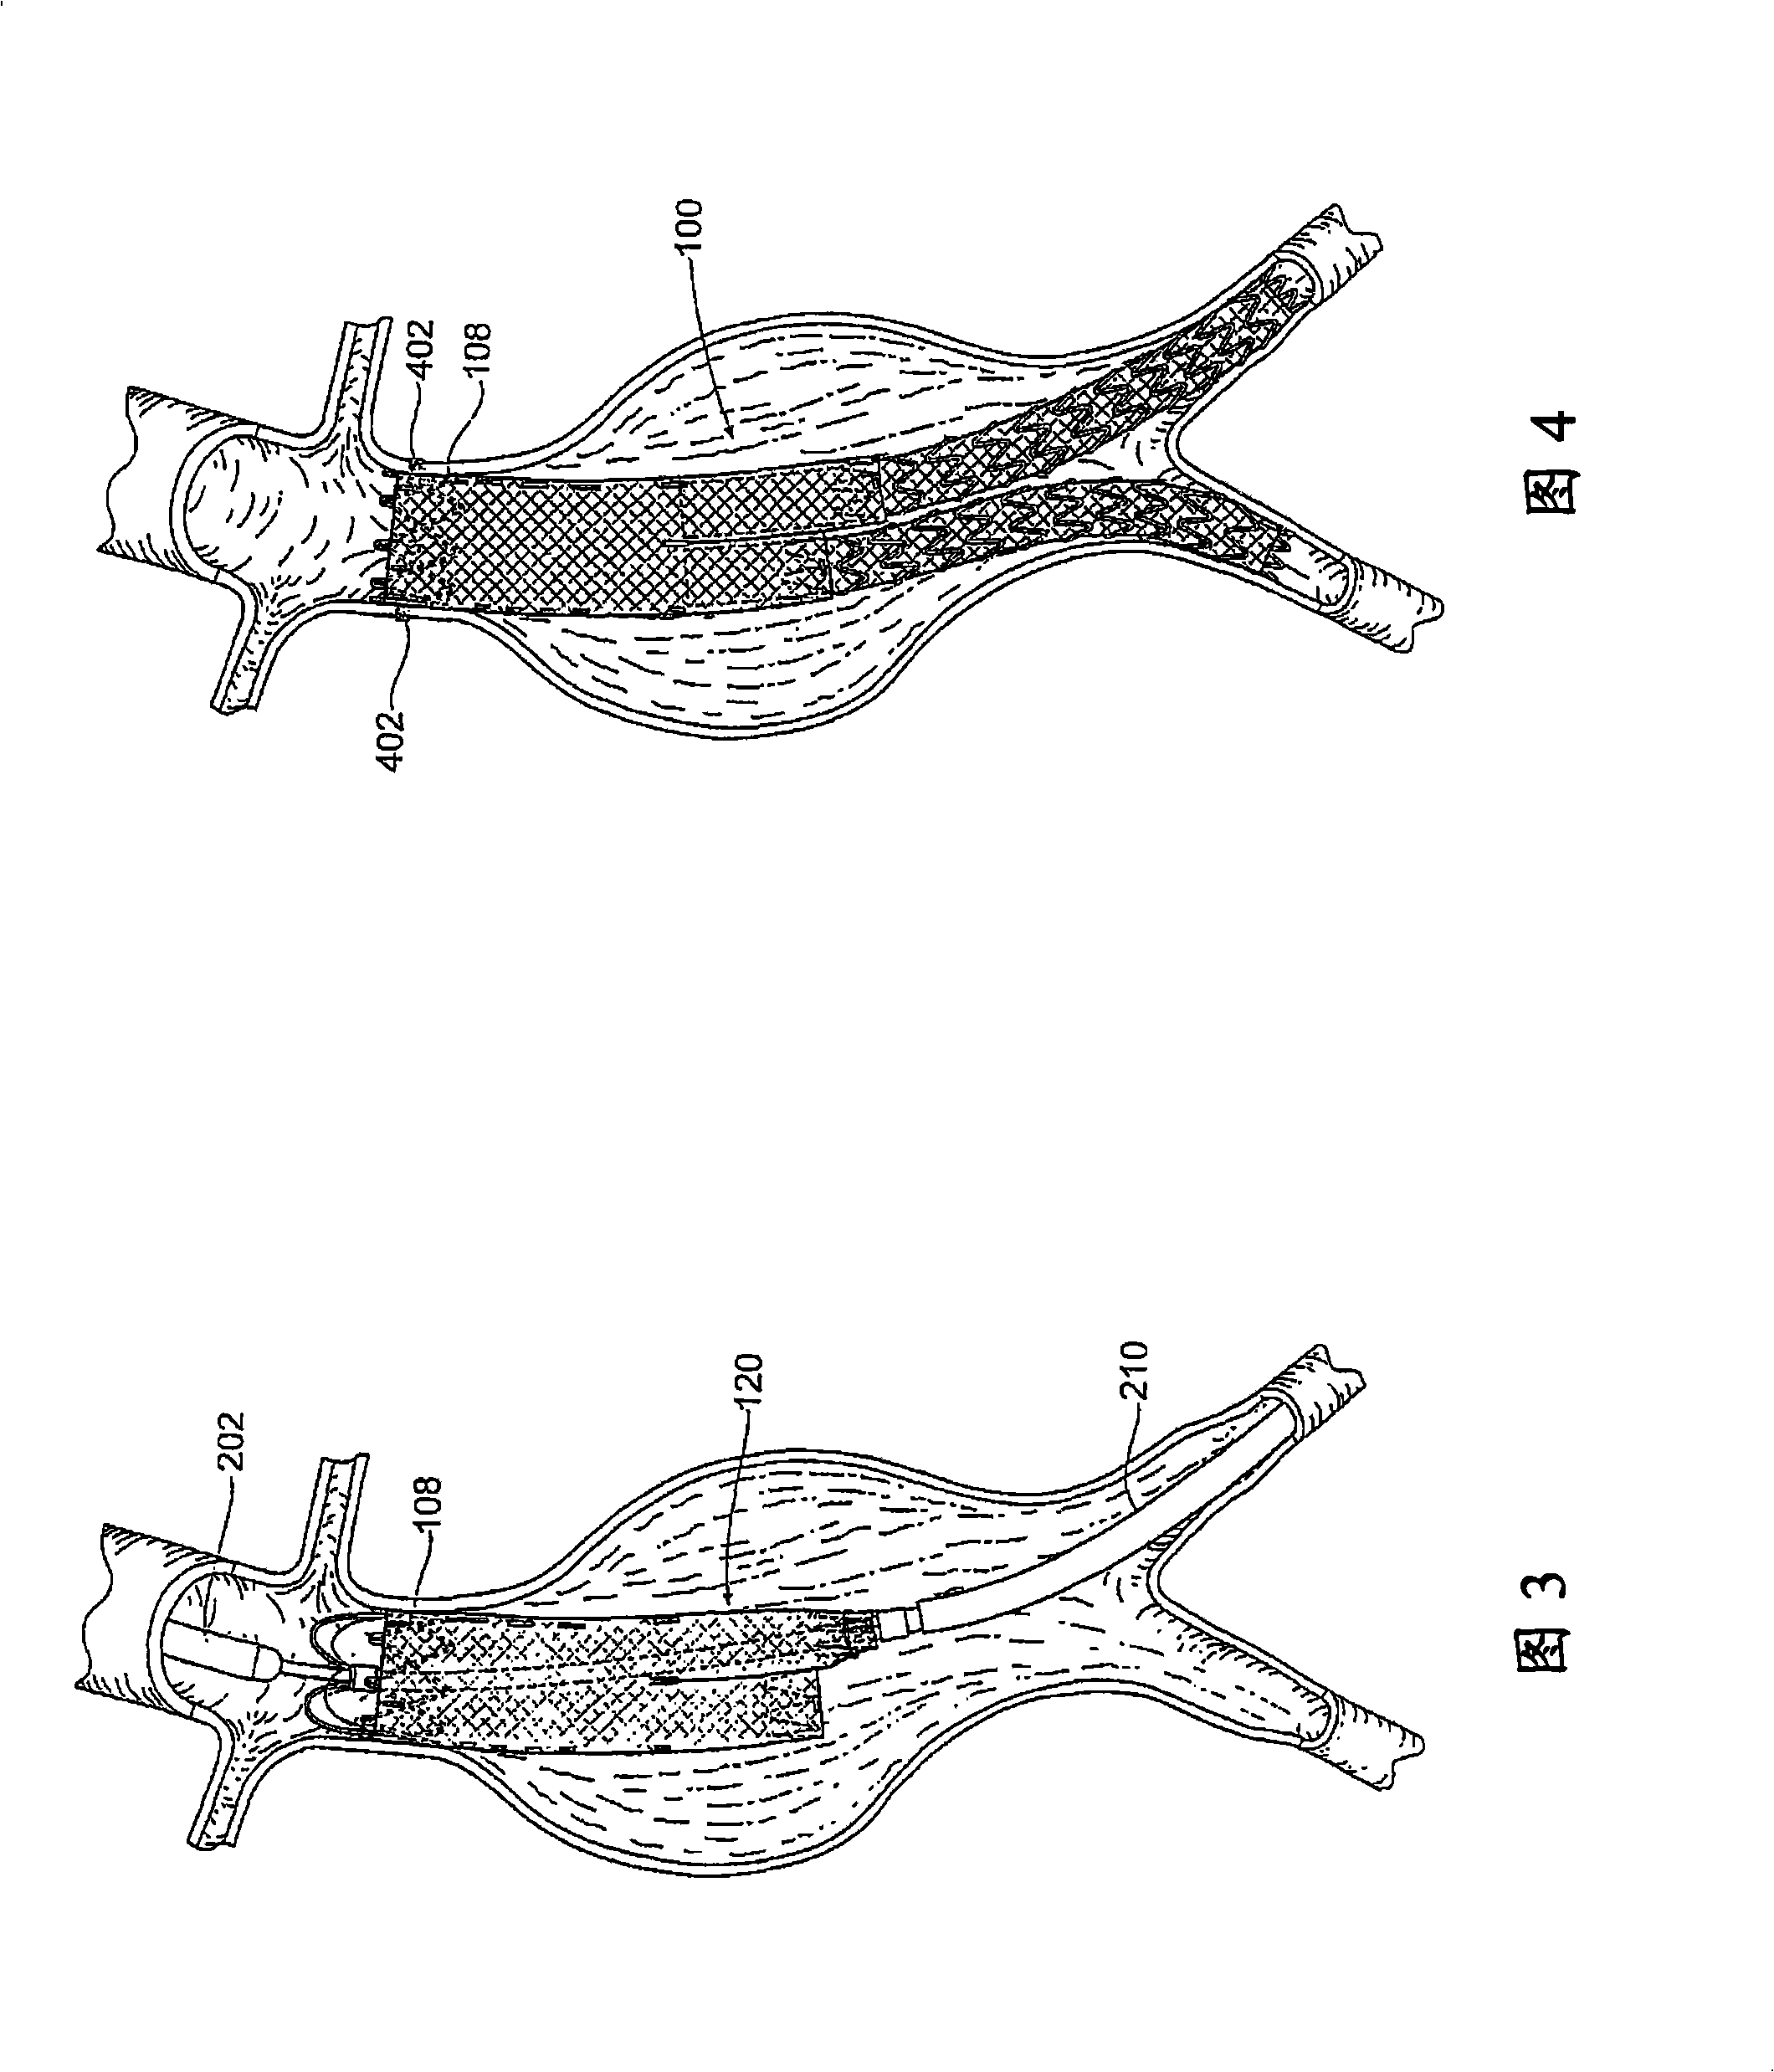 Devices, systems and methods for prosthesis delivery and implantation